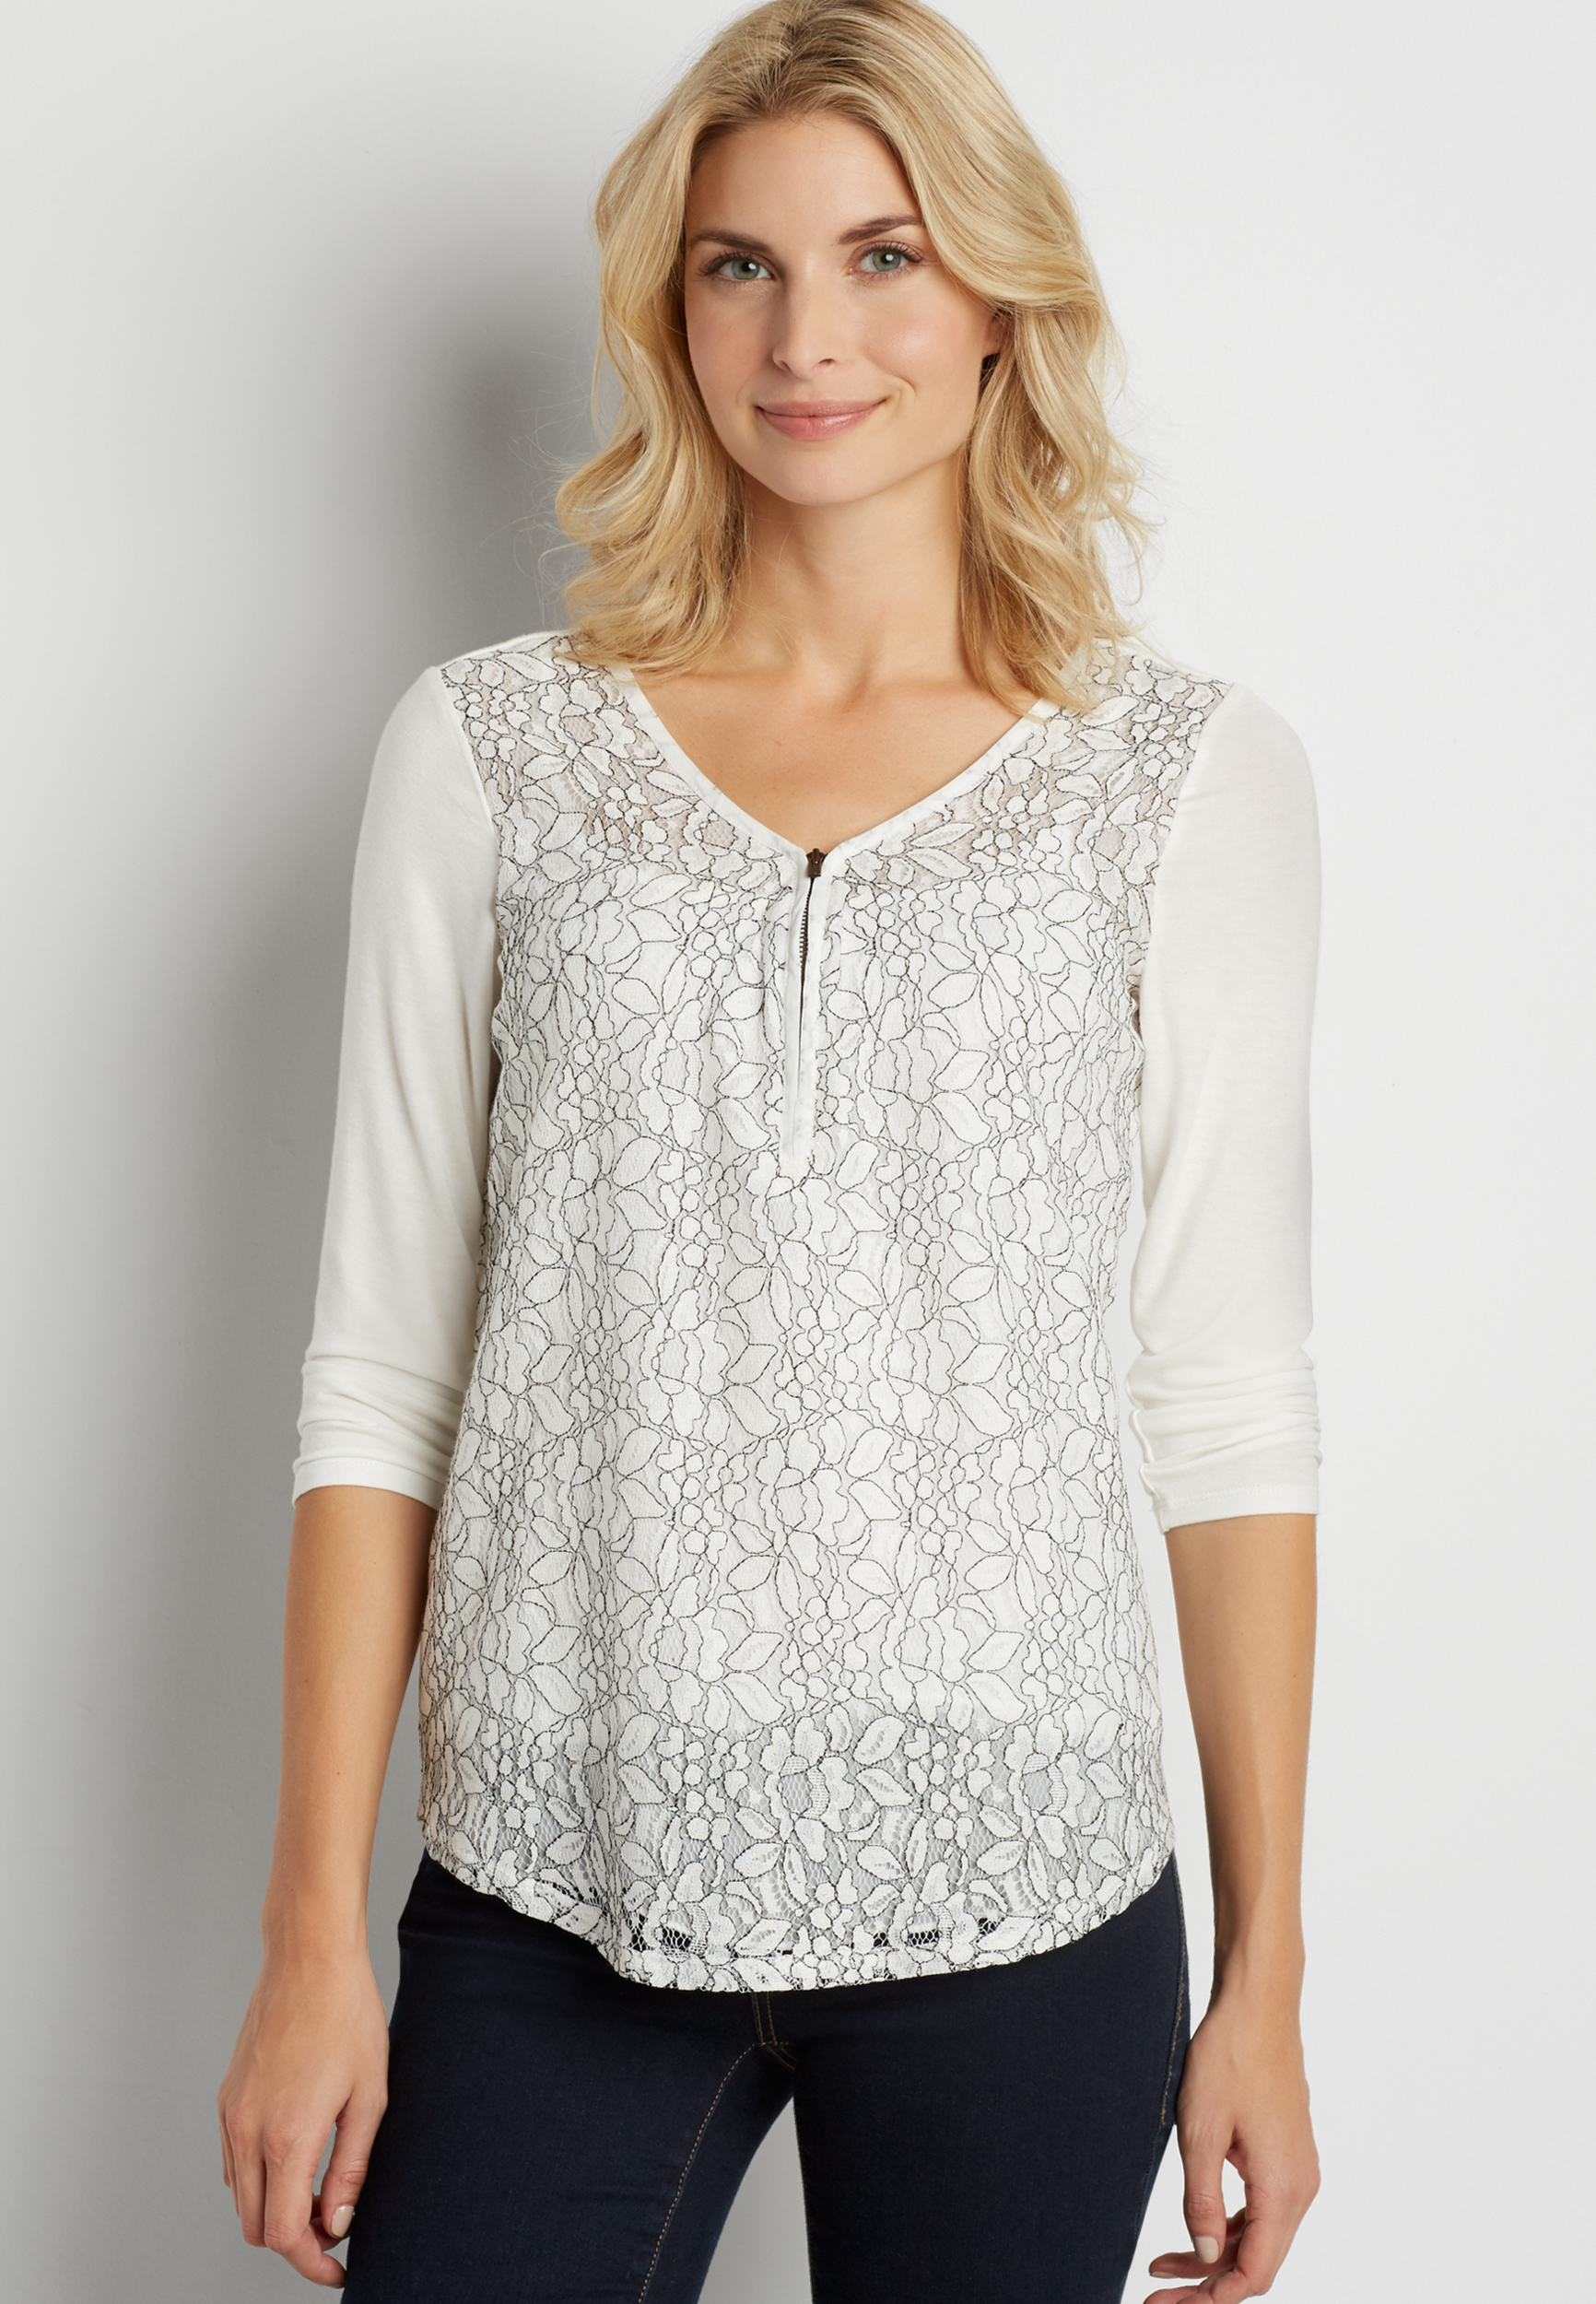 zip neck top with floral lace overlay in white | maurices